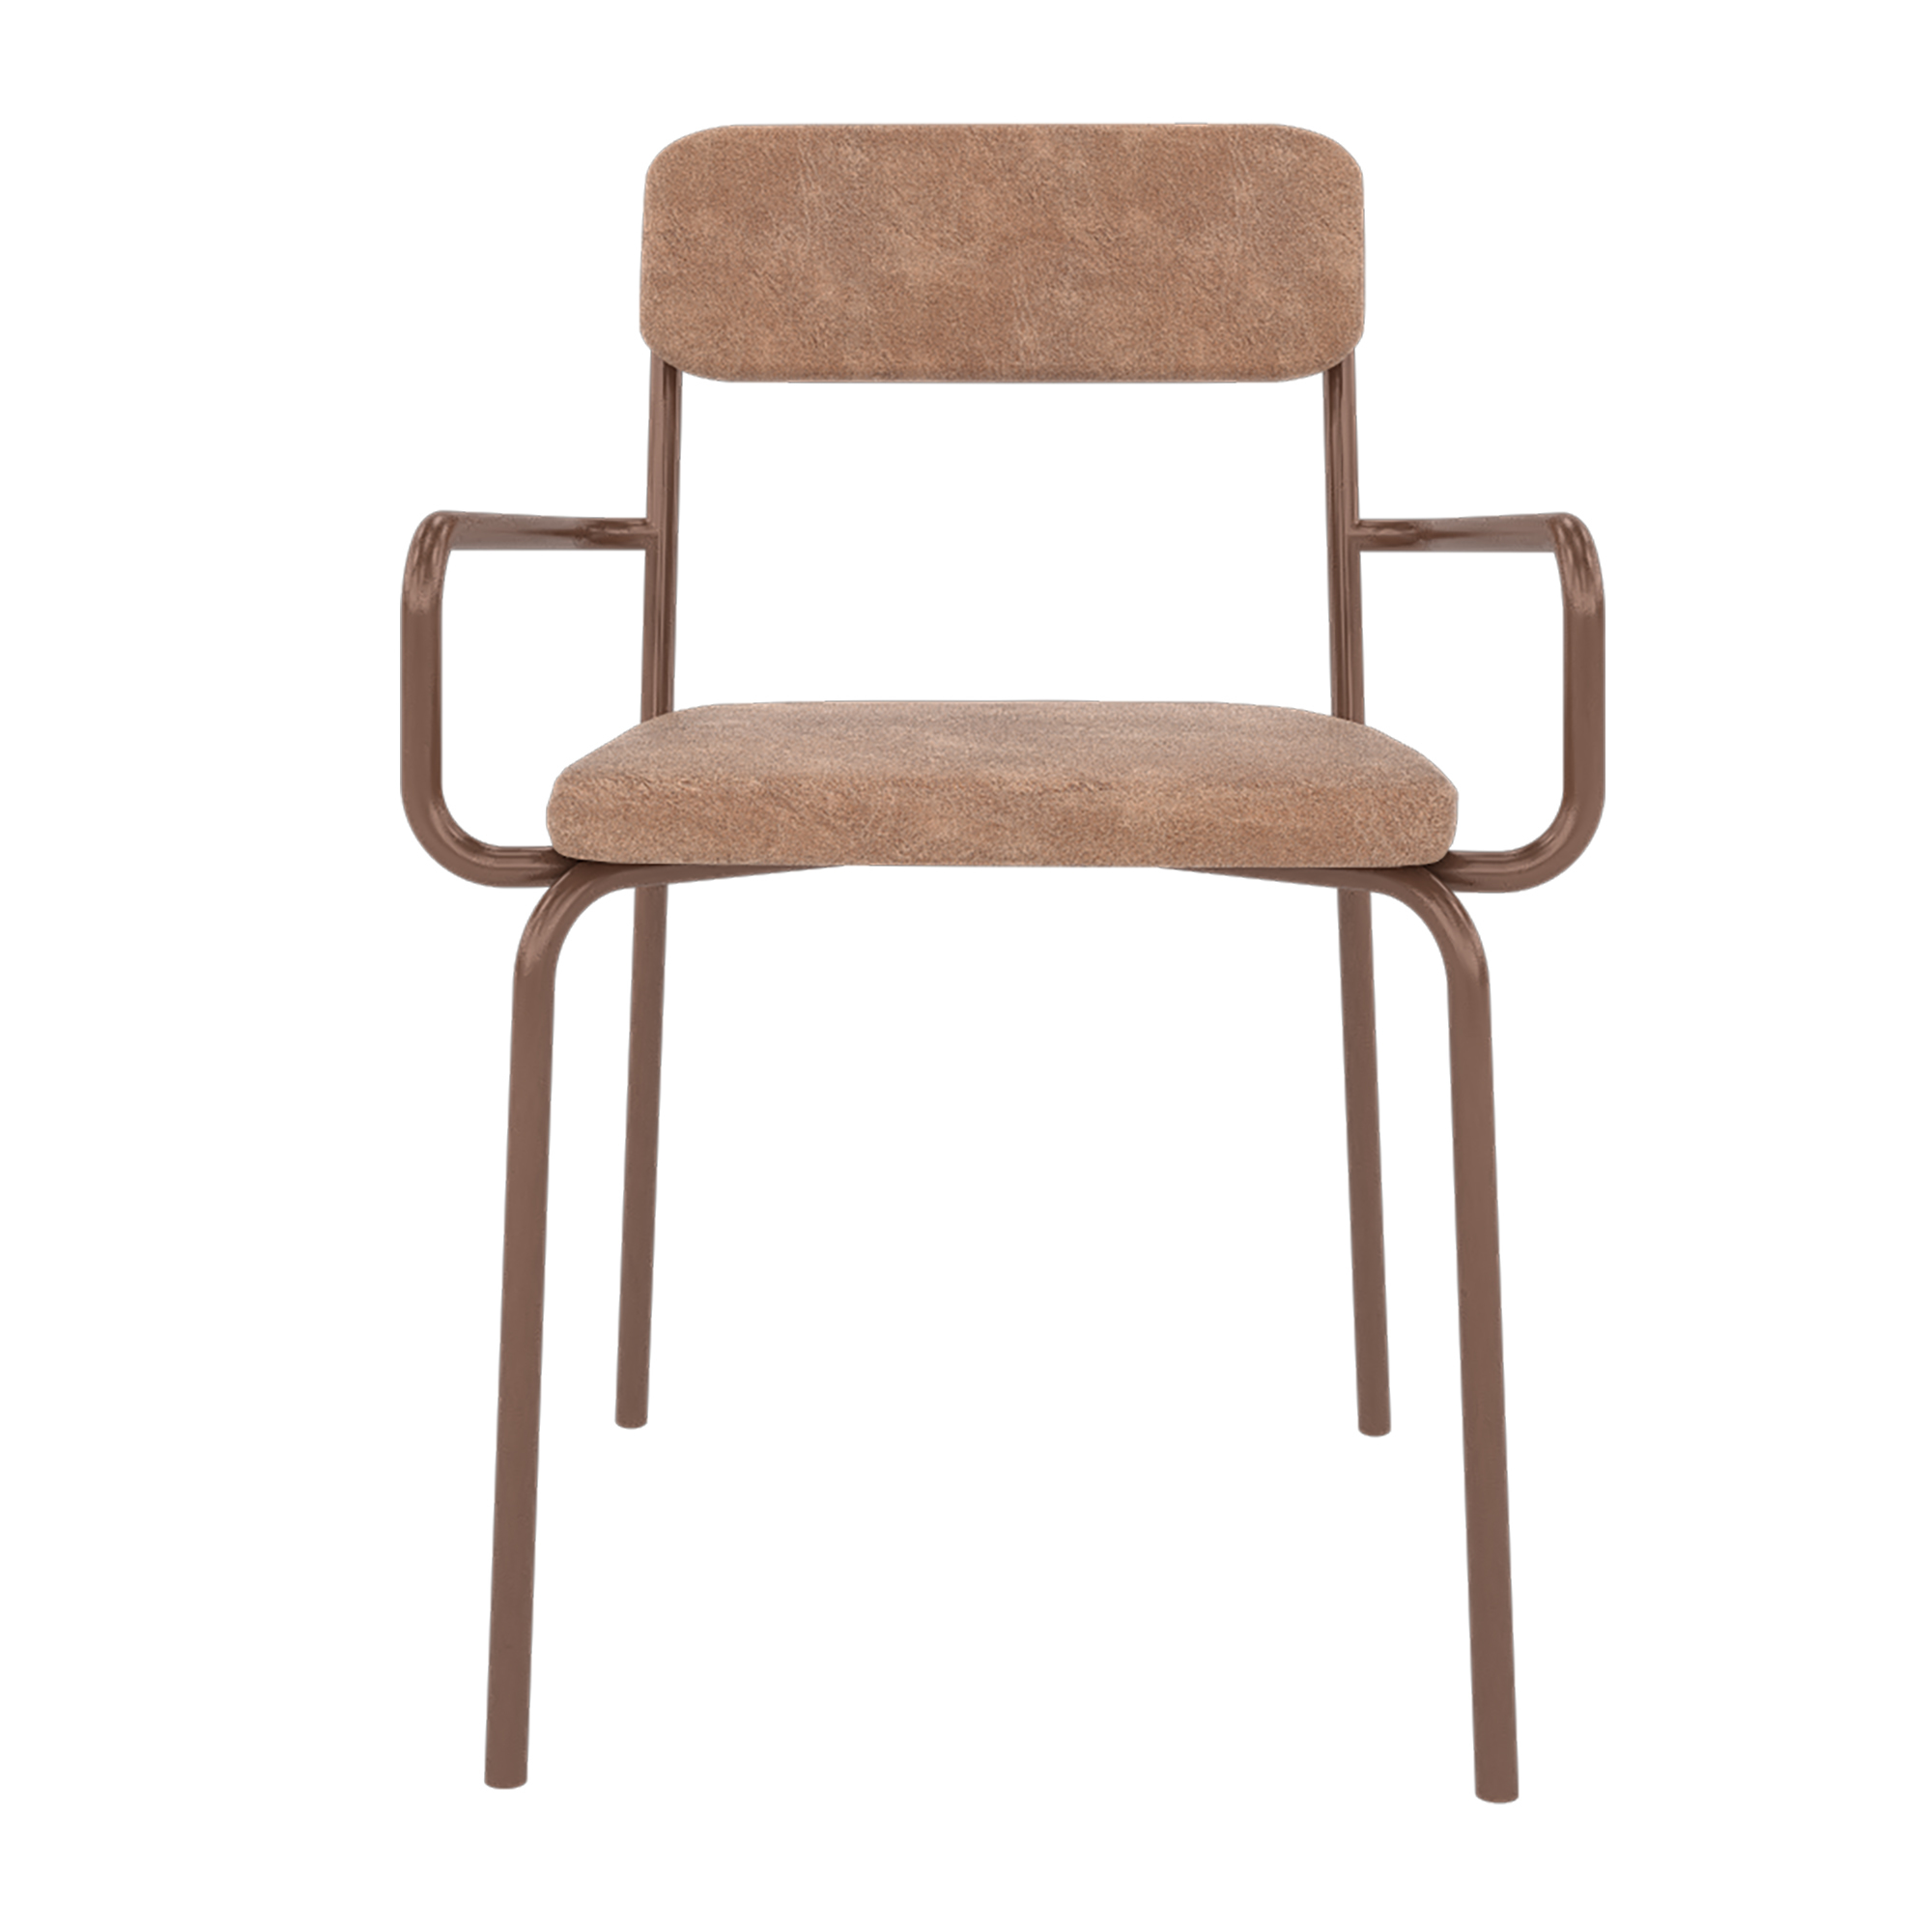 Manhattan Comfort, Whythe PU Leather Chair in Corten, Primary Color Tan, Included (qty.) 1 Model 2PZ